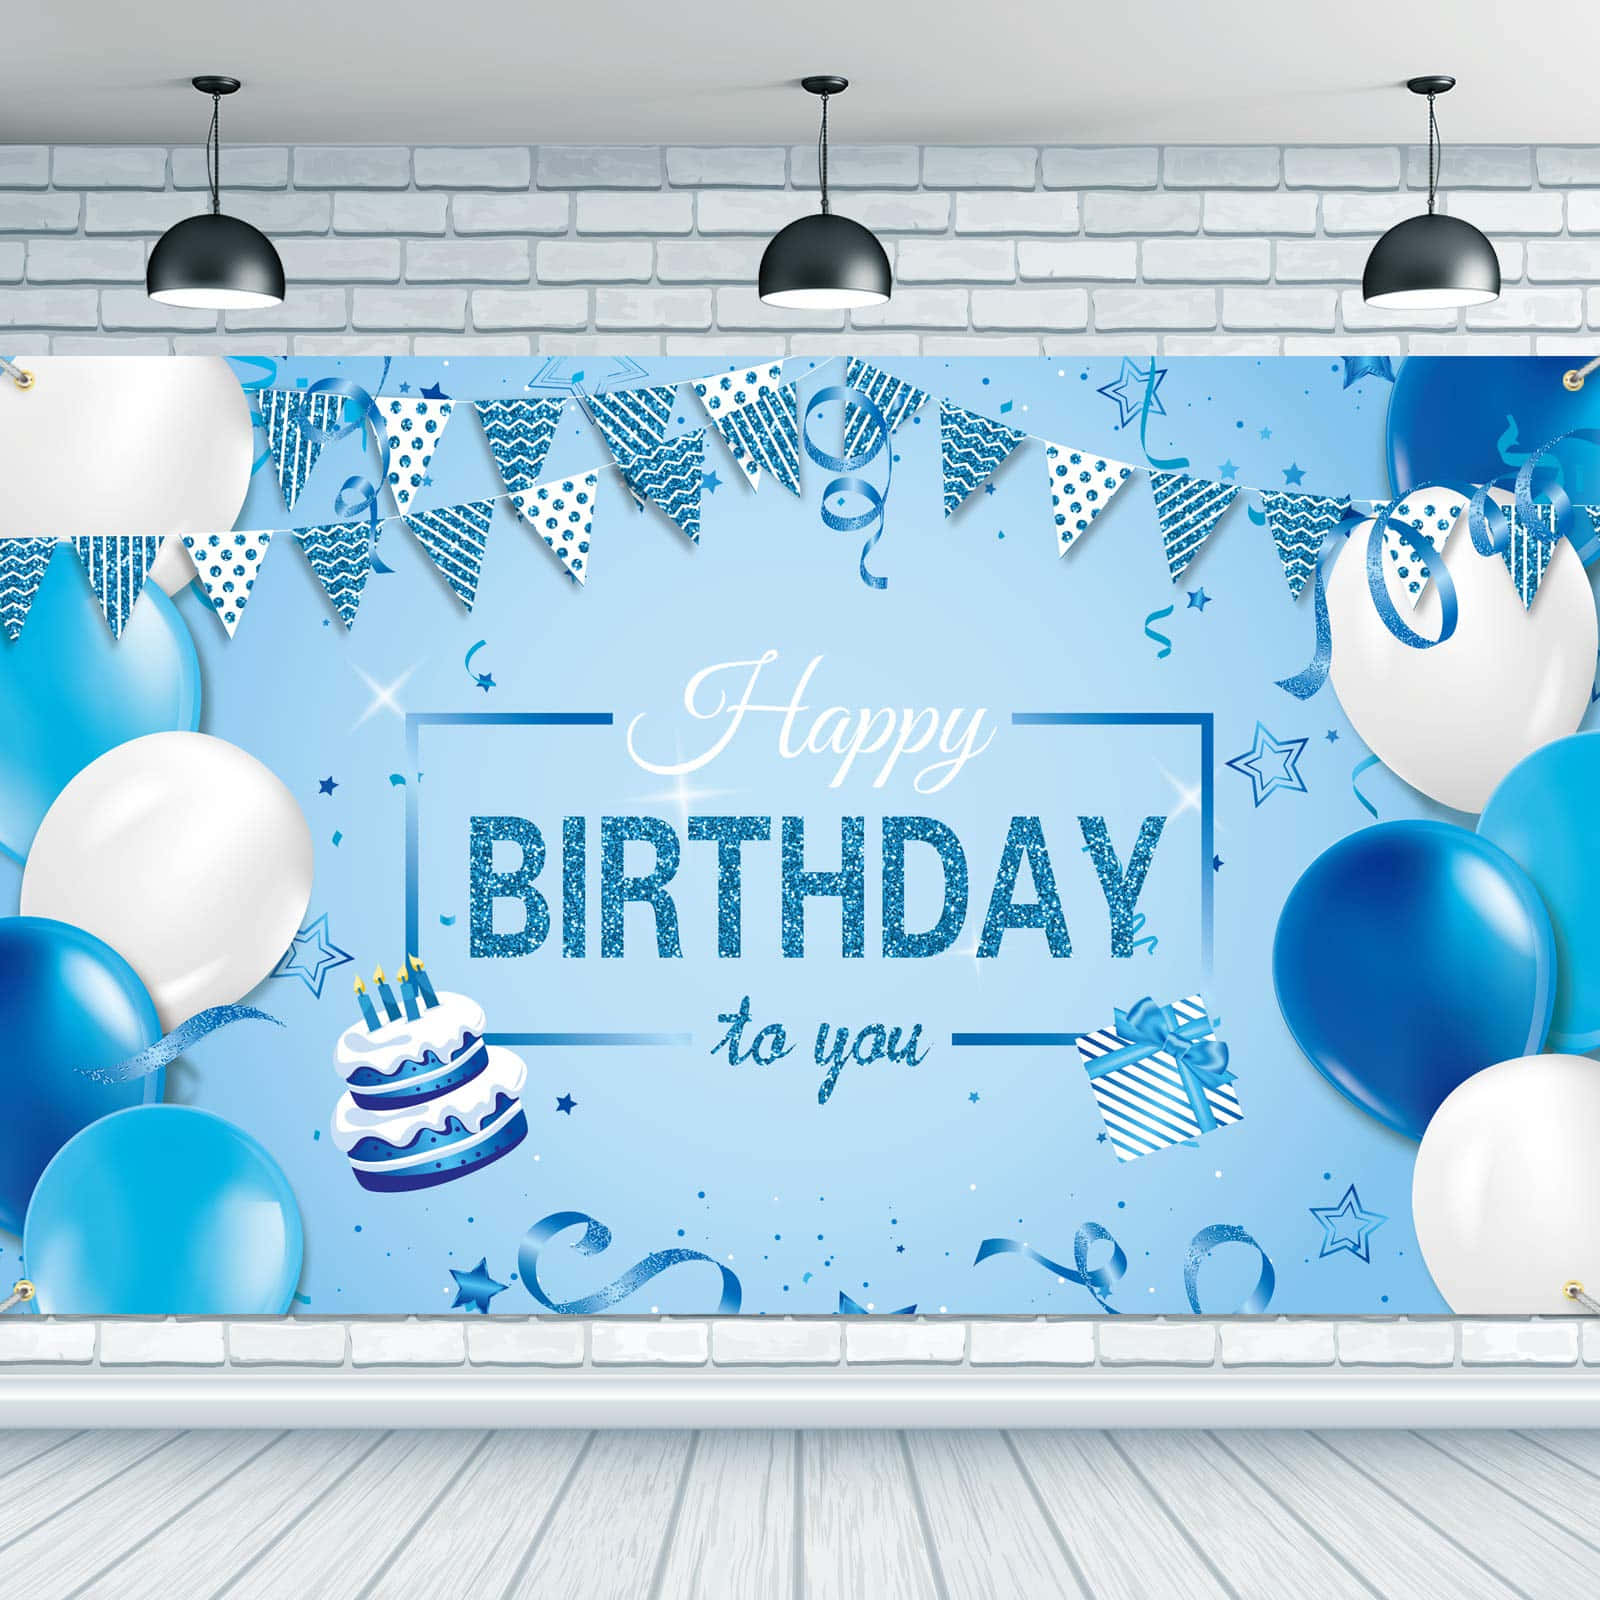 Celebrate your special day with a beautifully blue birthday background.